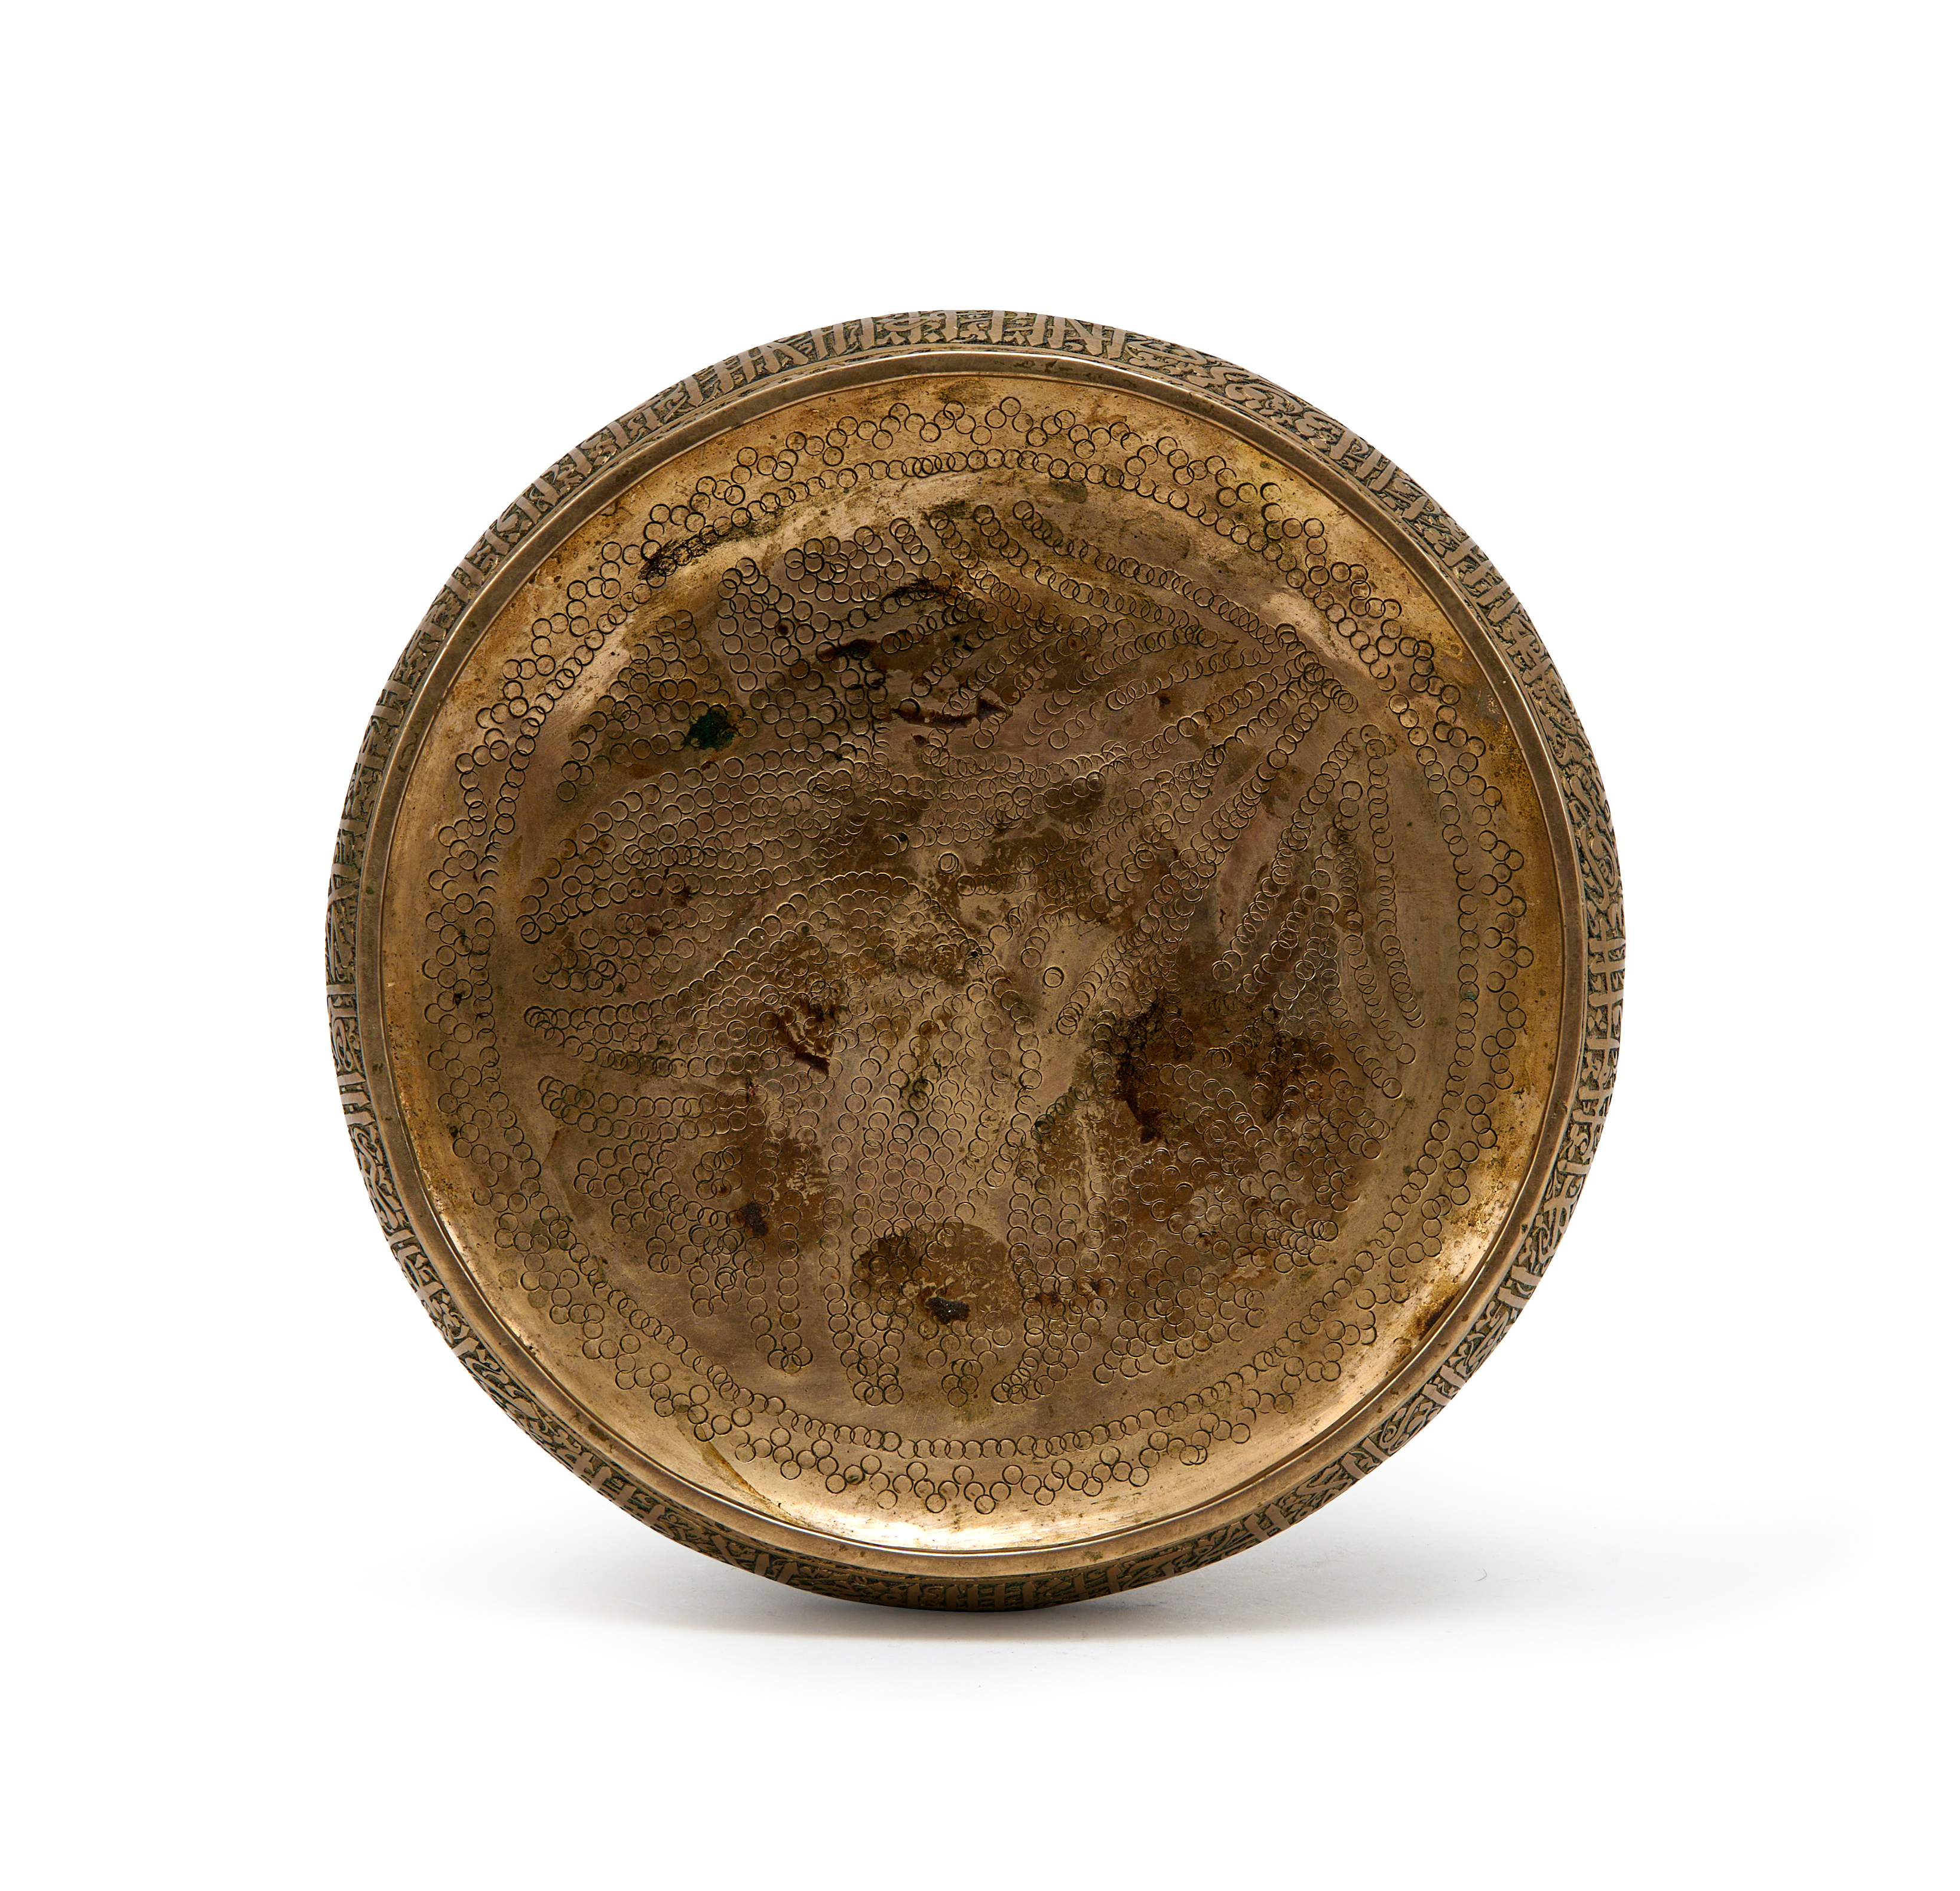 A CALLIGRAPHIC INSCRIBED BASIN, ZAND DYNASTY, 18TH CENTURY, PERSIA - Image 3 of 3